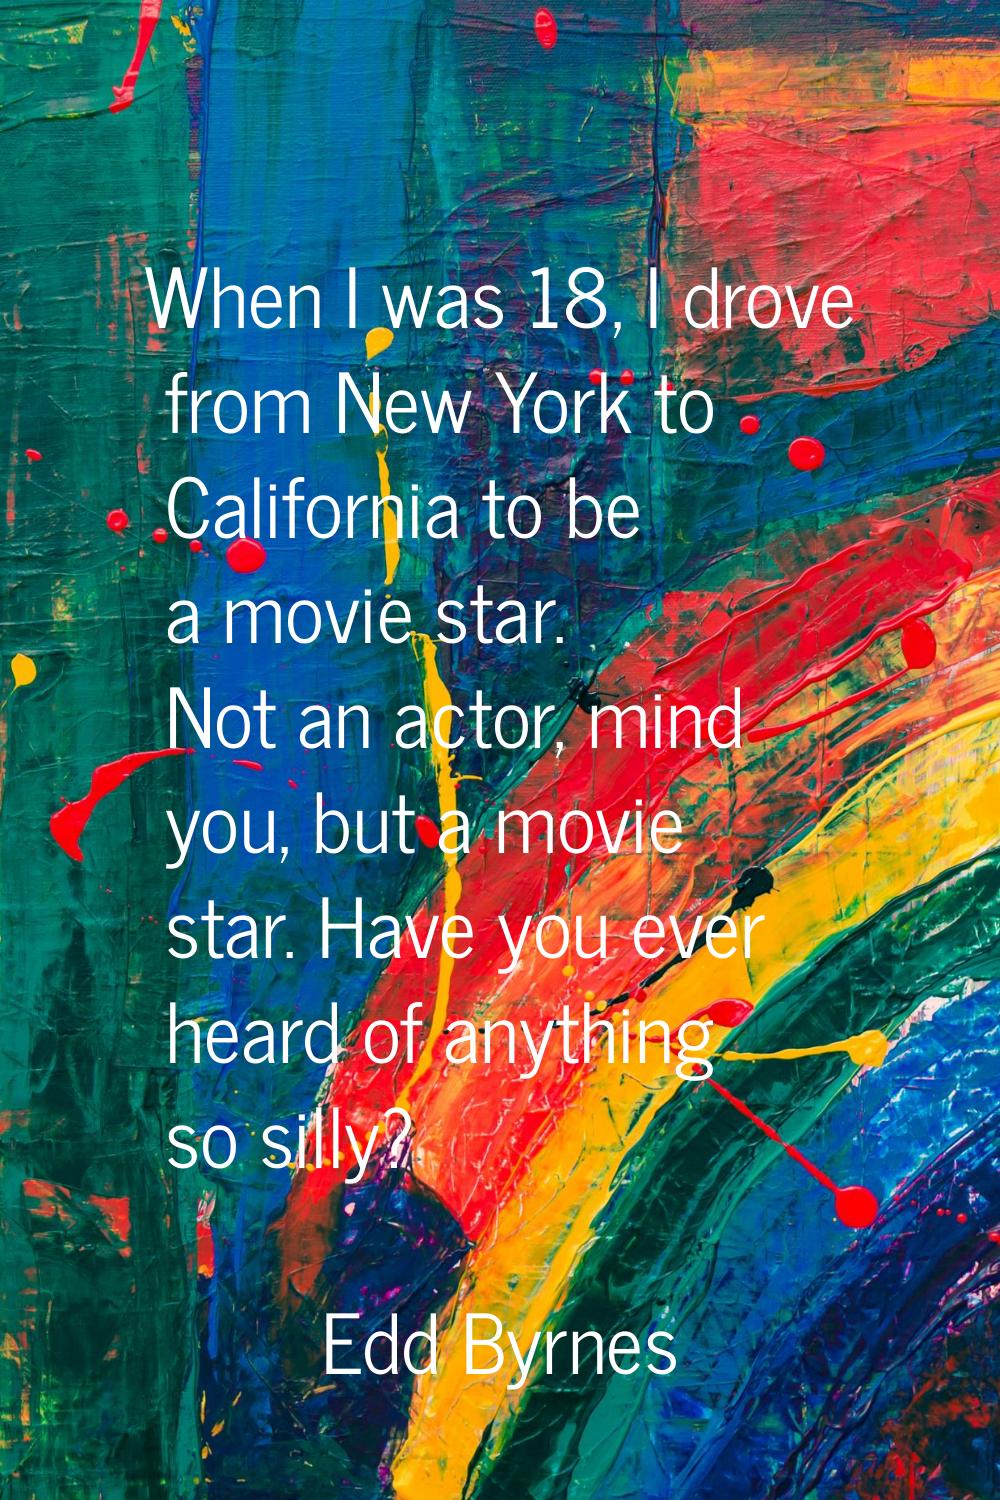 When I was 18, I drove from New York to California to be a movie star. Not an actor, mind you, but 